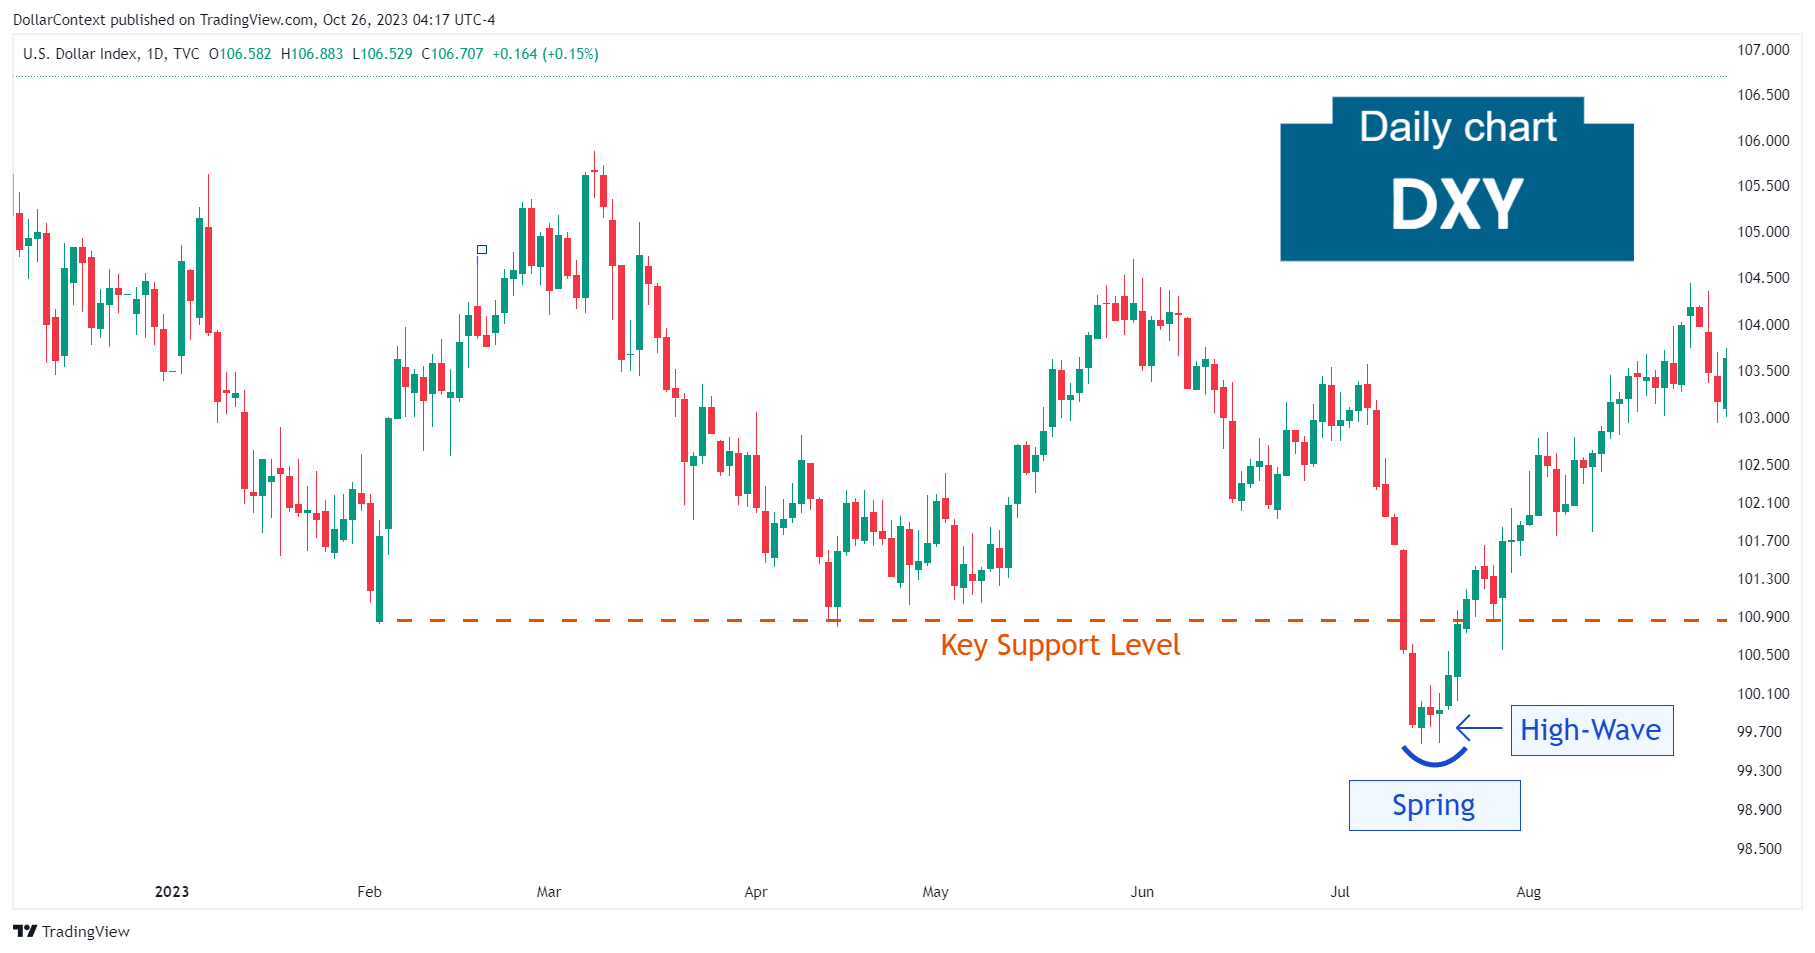 DXY: Spring in July 2023 (Daily Chart)